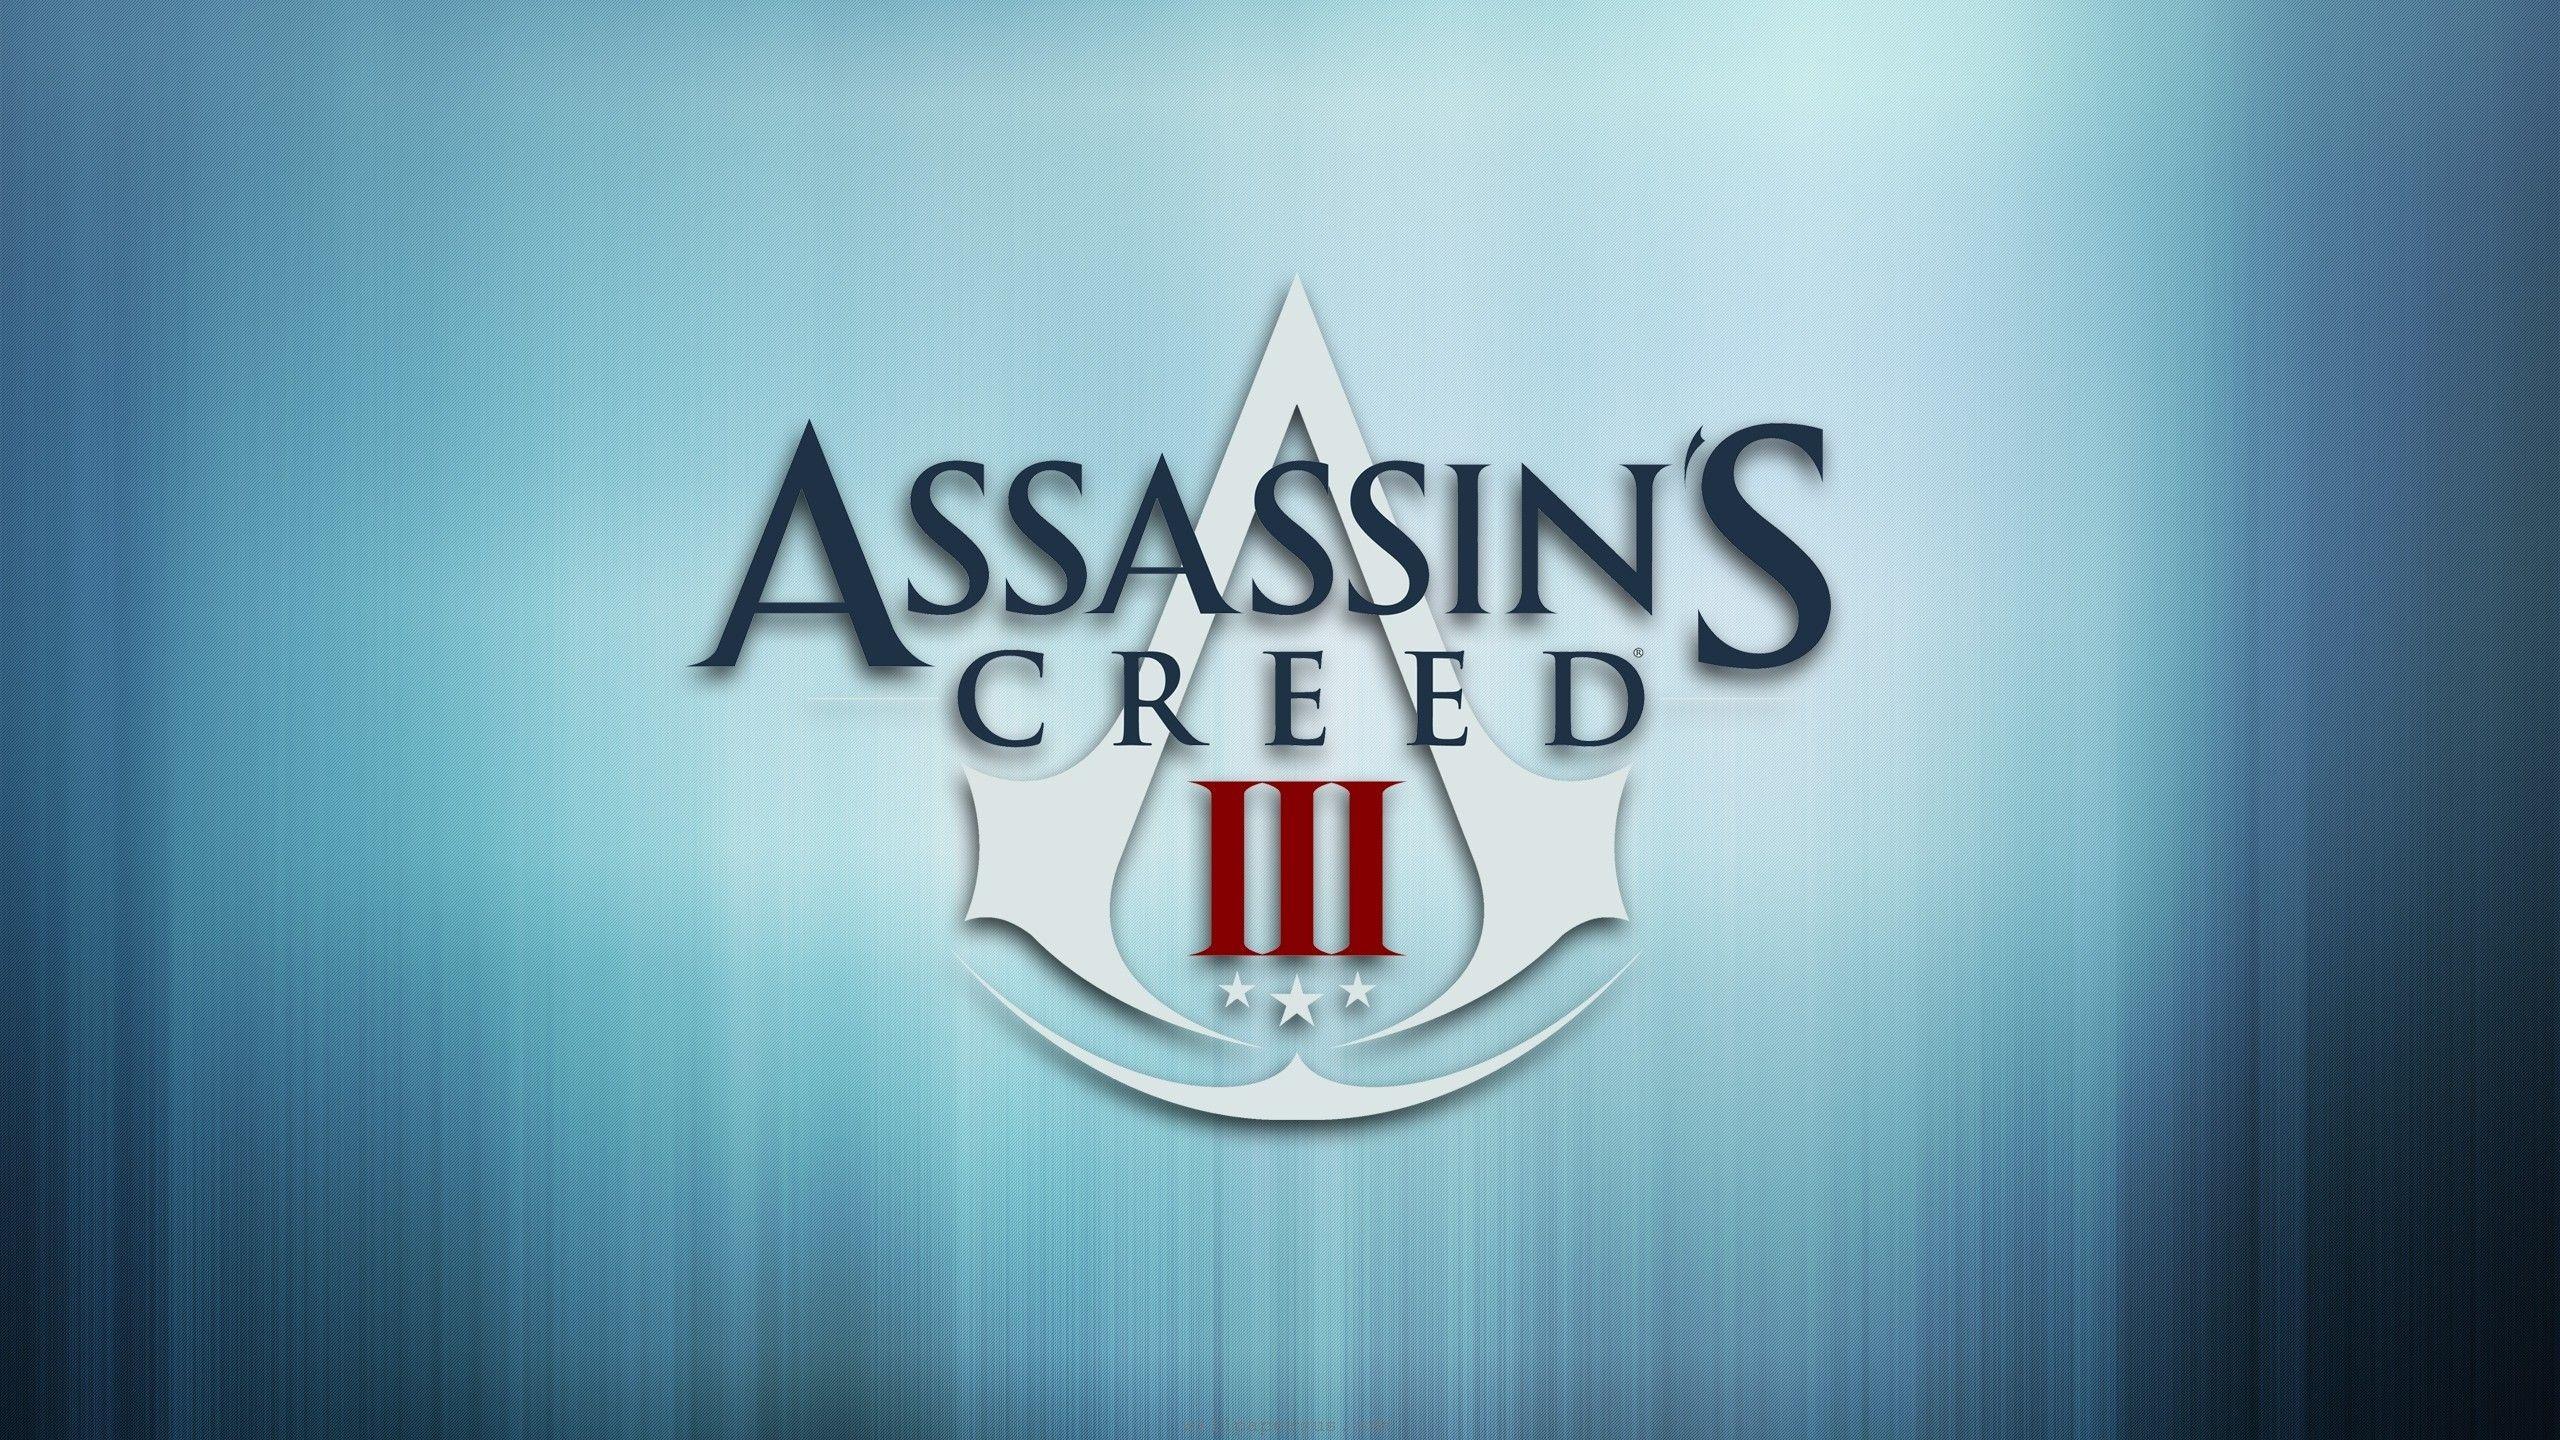 Download Assassin&;s Creed 3 Logo Wallpaper (5834) Full Size. Free